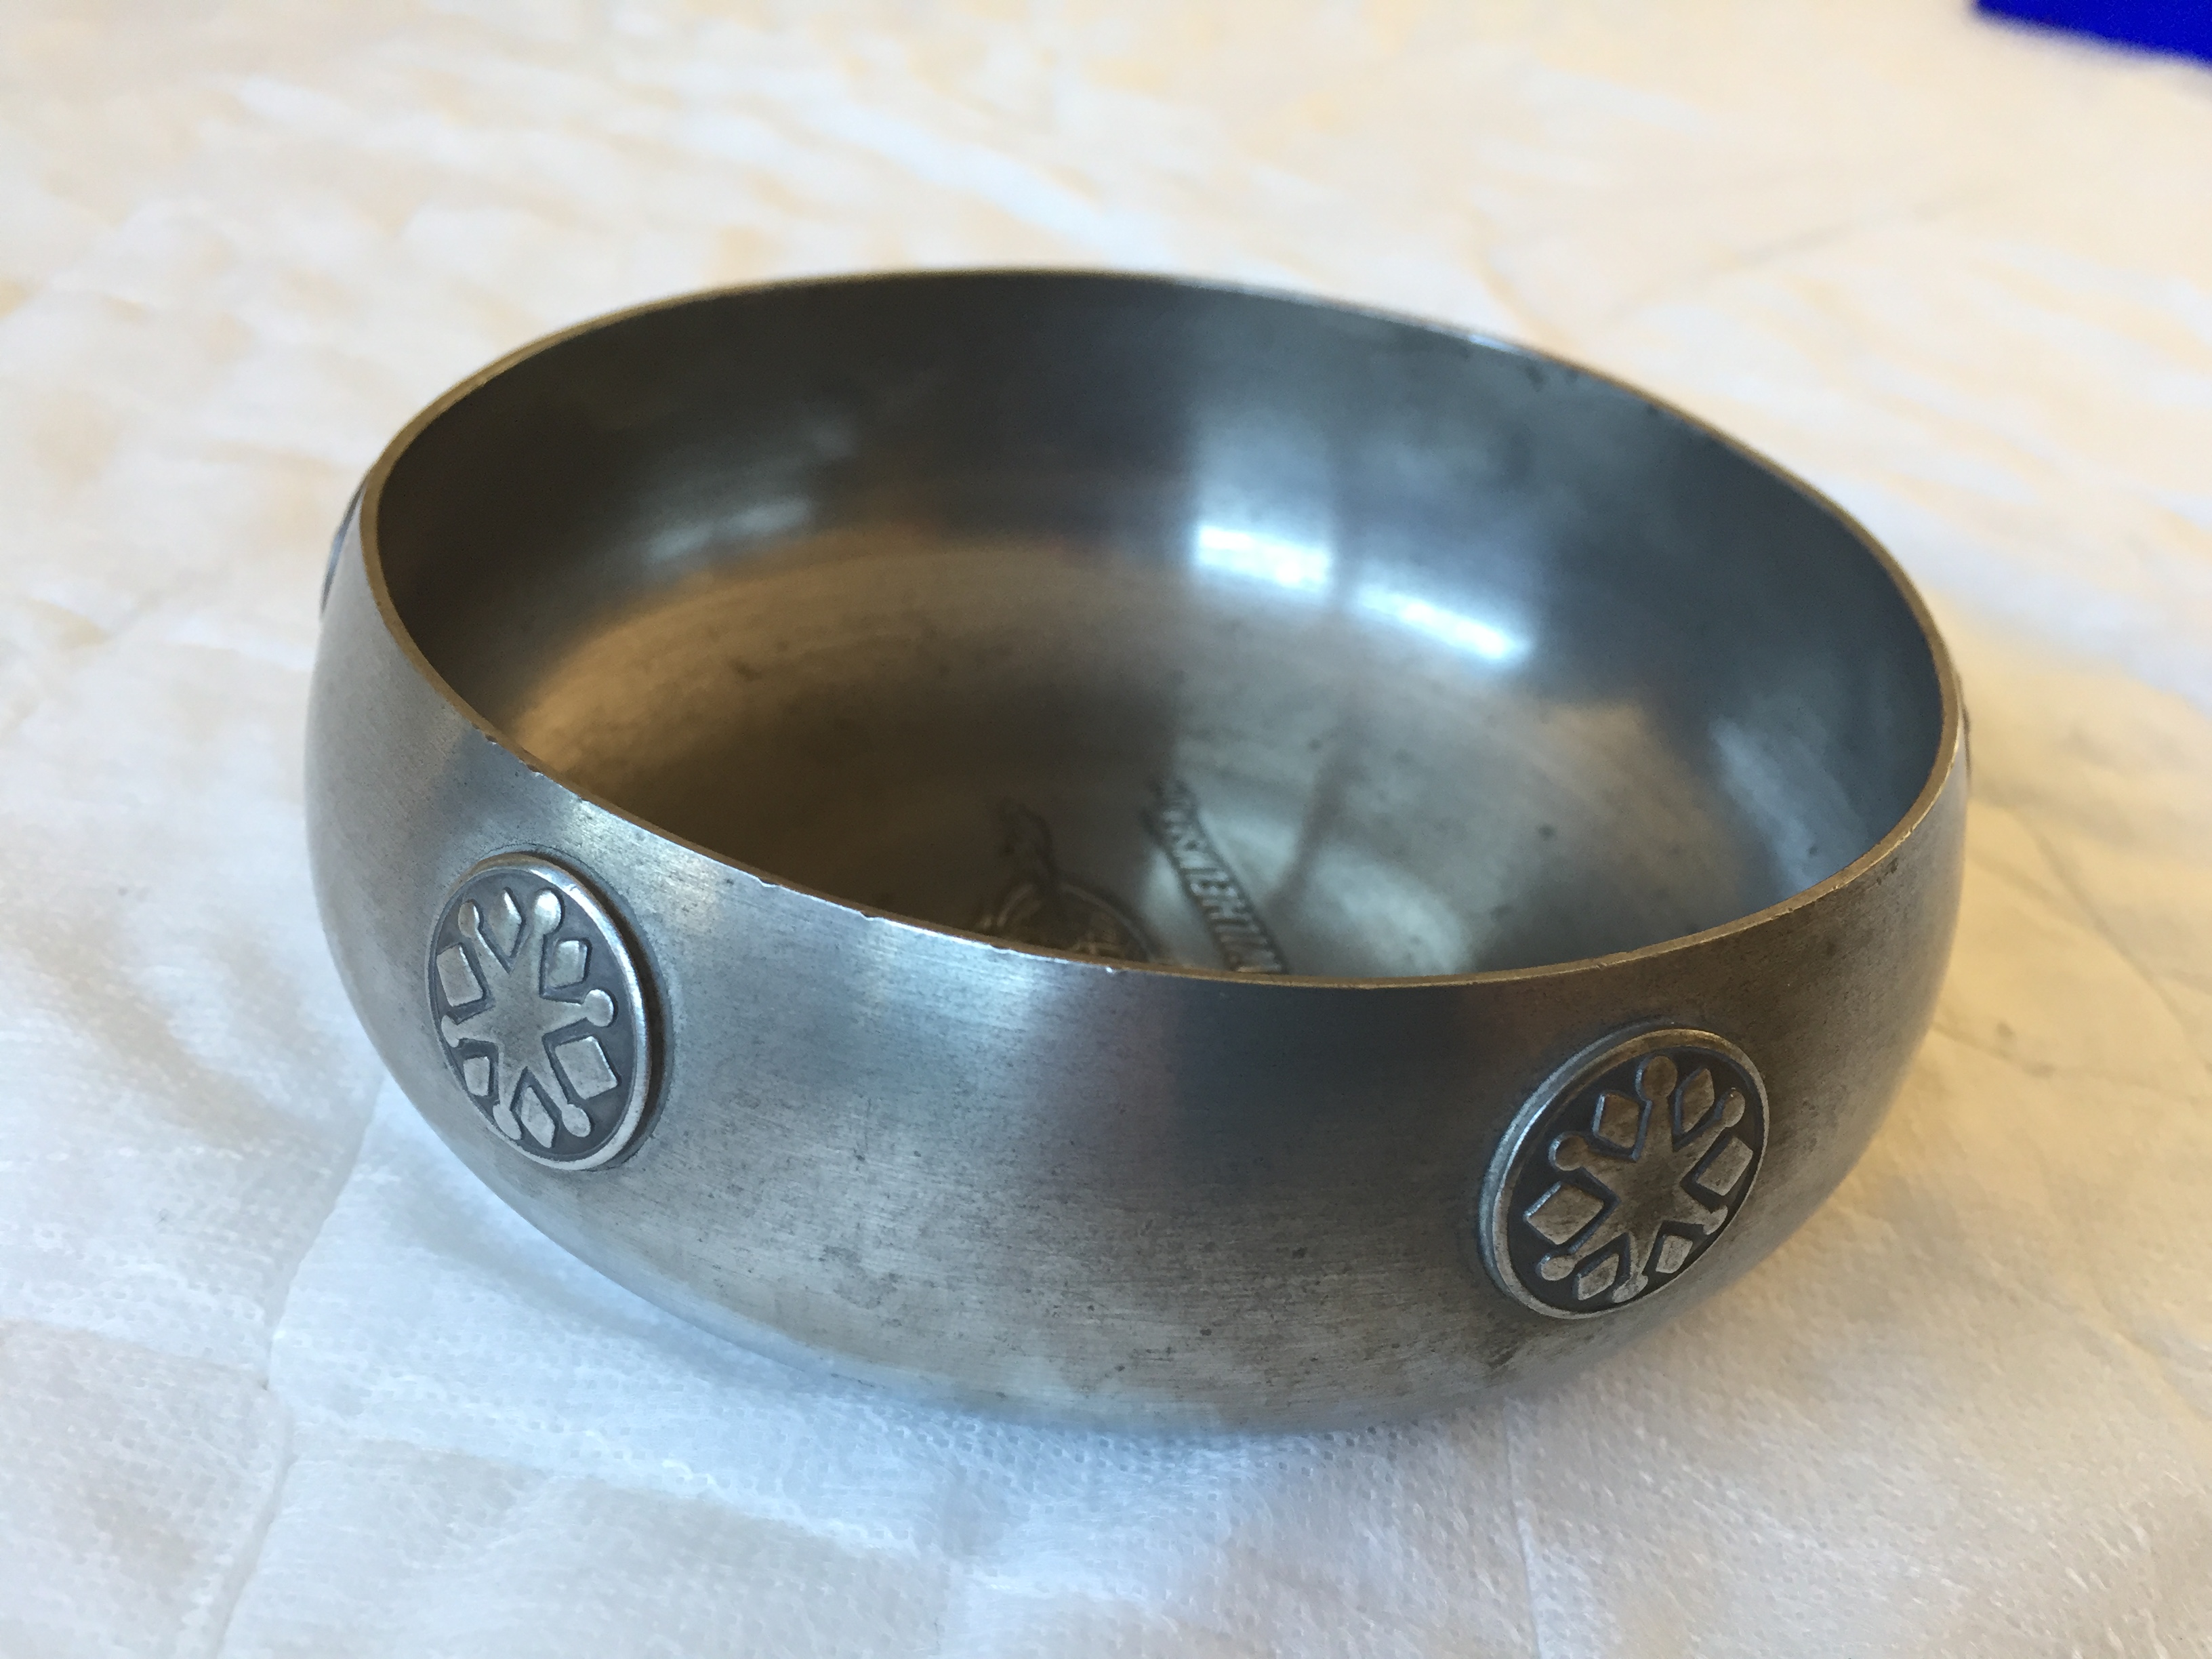 PEWTER SERVING BOWL FROM THE WILHELMSEN LINE